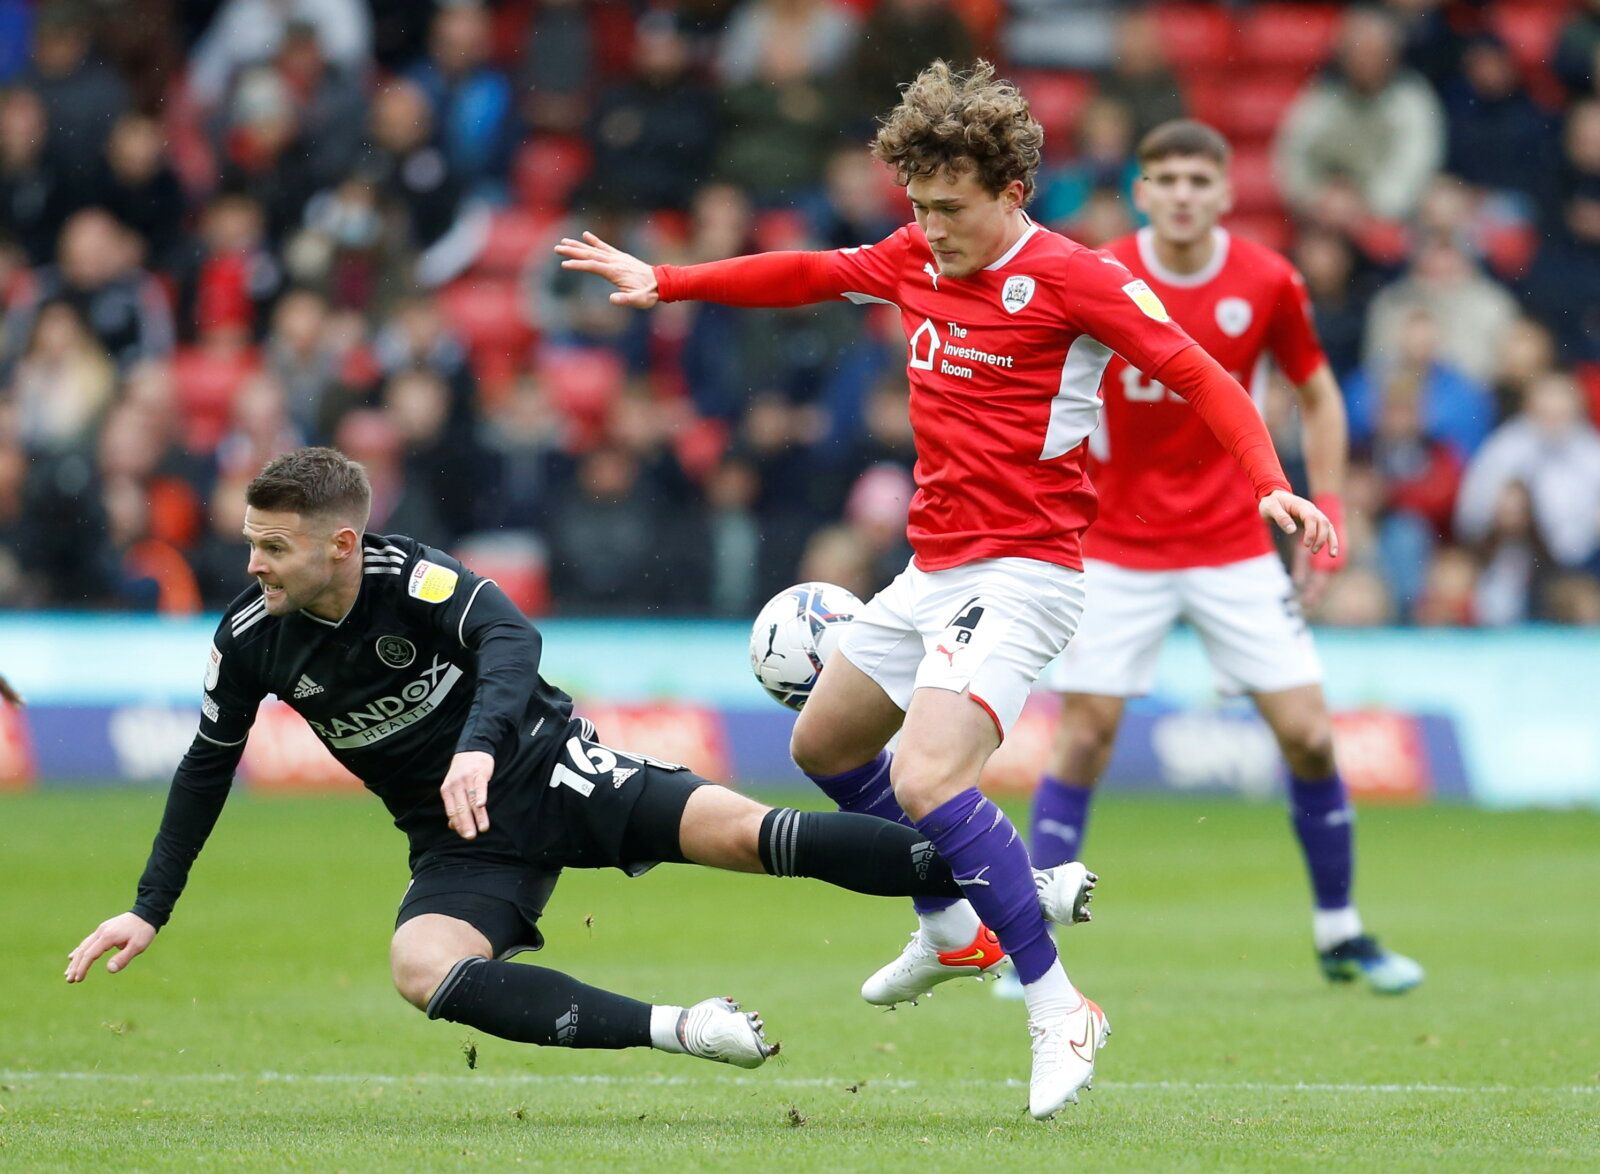 Soccer Football - Championship - Barnsley v Sheffield United - Oakwell, Barnsley, Britain - October 24, 2021 Sheffield United's Oliver Norwood and Barnsley's Callum Styles in action Action Images/Ed Sykes  EDITORIAL USE ONLY. No use with unauthorized audio, video, data, fixture lists, club/league logos or "live" services. Online in-match use limited to 75 images, no video emulation. No use in betting, games or single club/league/player publications.  Please contact your account representative fo